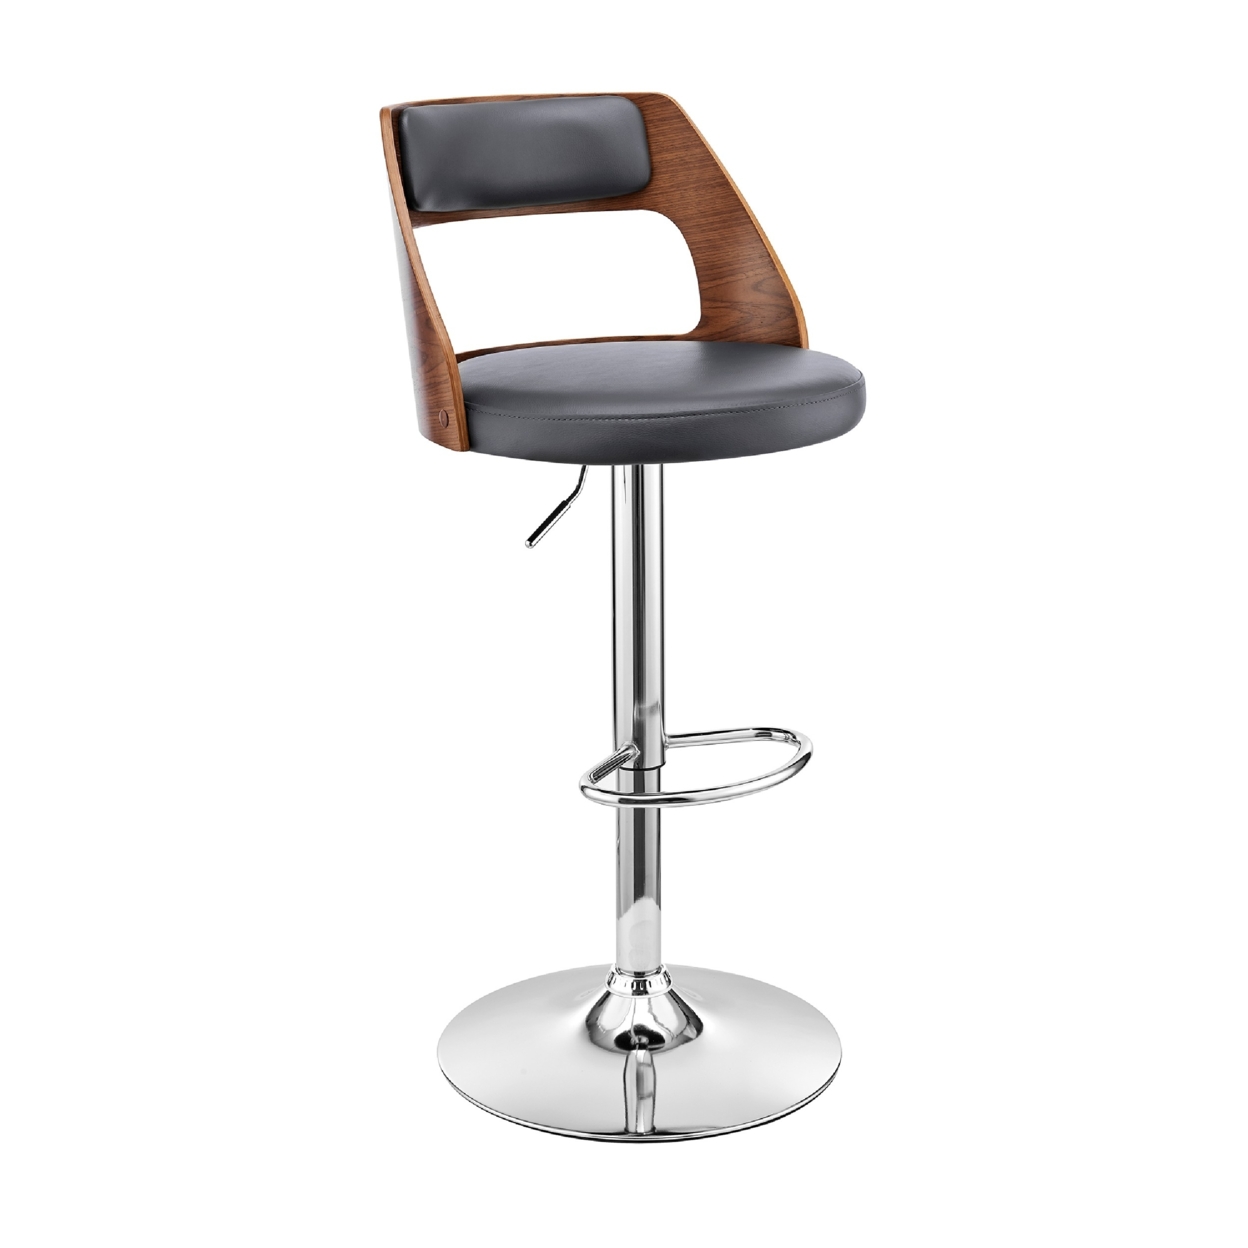 Adjustable Barstool With Open Wooden Back, Black And Gray- Saltoro Sherpi